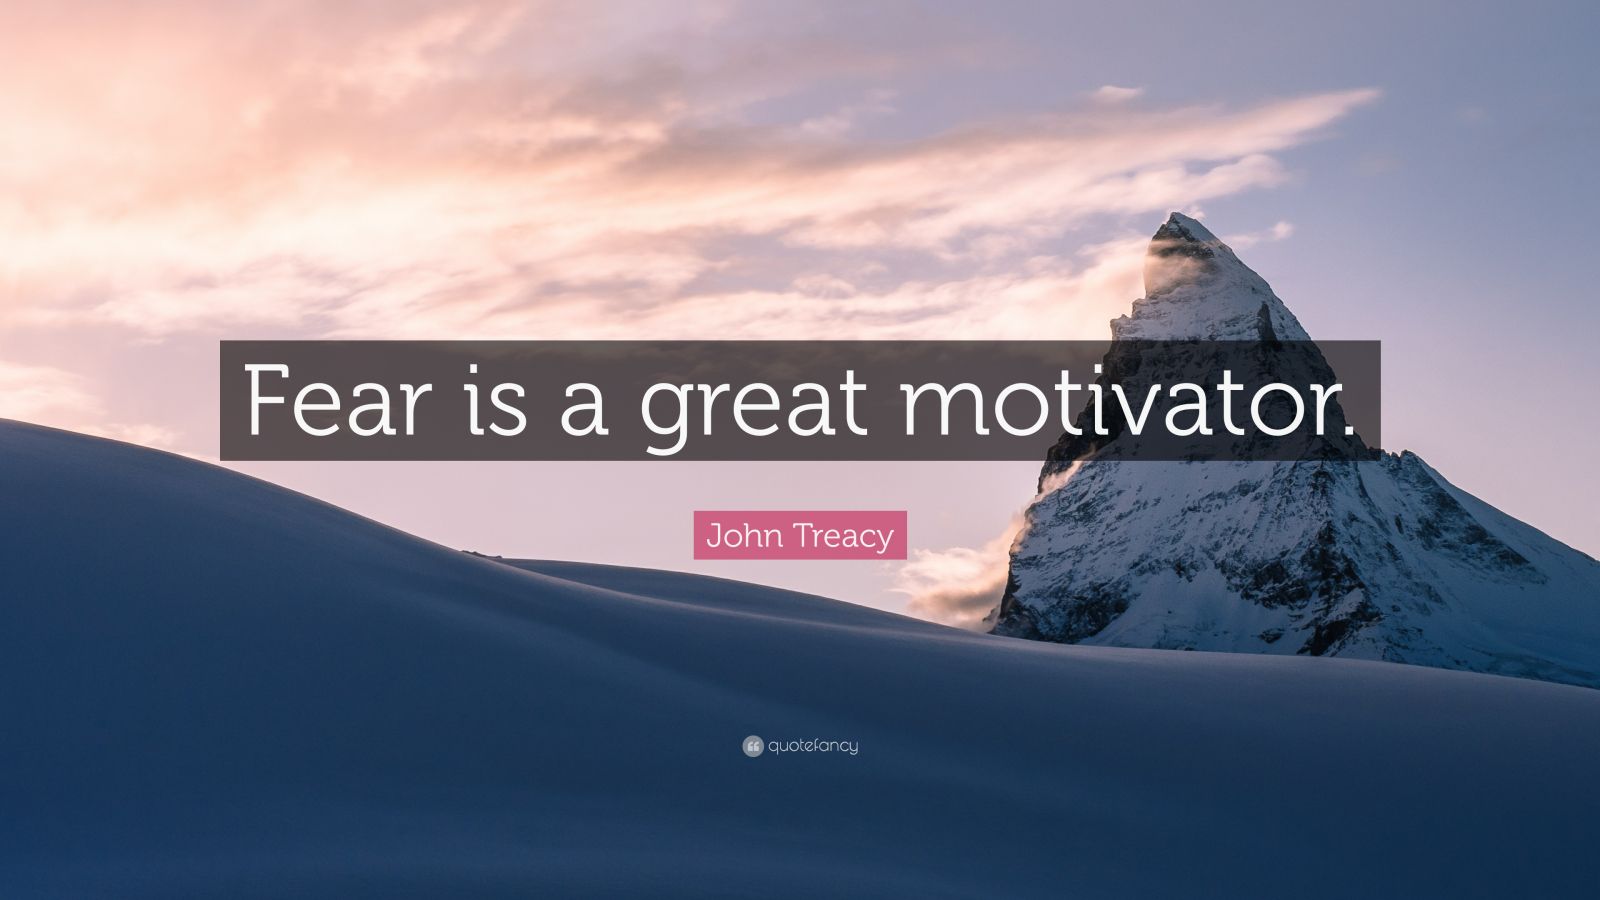 John Treacy Quote: “Fear is a great motivator.” (9 wallpapers) - Quotefancy